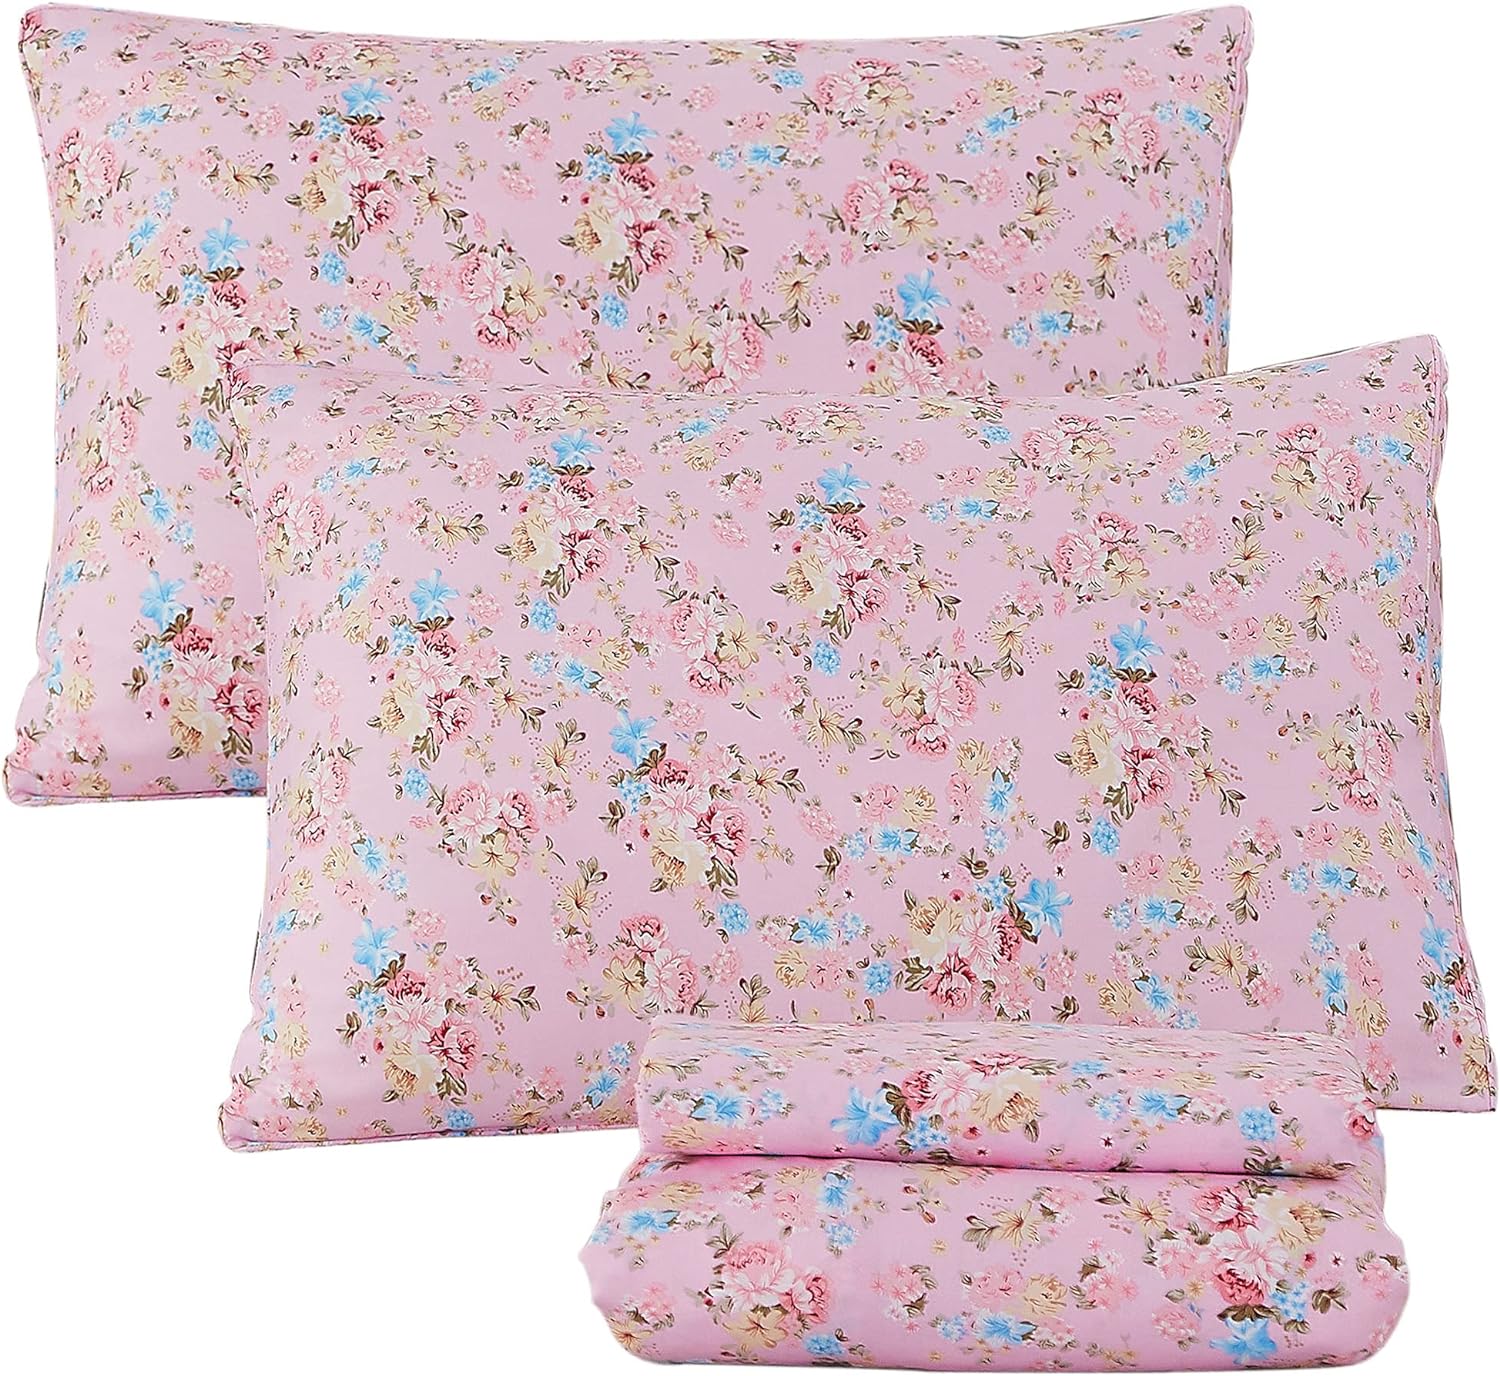 FADFAY Sheets Set Queen Elegant Rose Floral Bedding Shabby Pink Flower Bed Sheet Set Vintage Farmhouse Bedding 100% Cotton Ultra Soft Girls Bedding with Deep Pocket Fitted Sheet 4Pcs, Queen Size